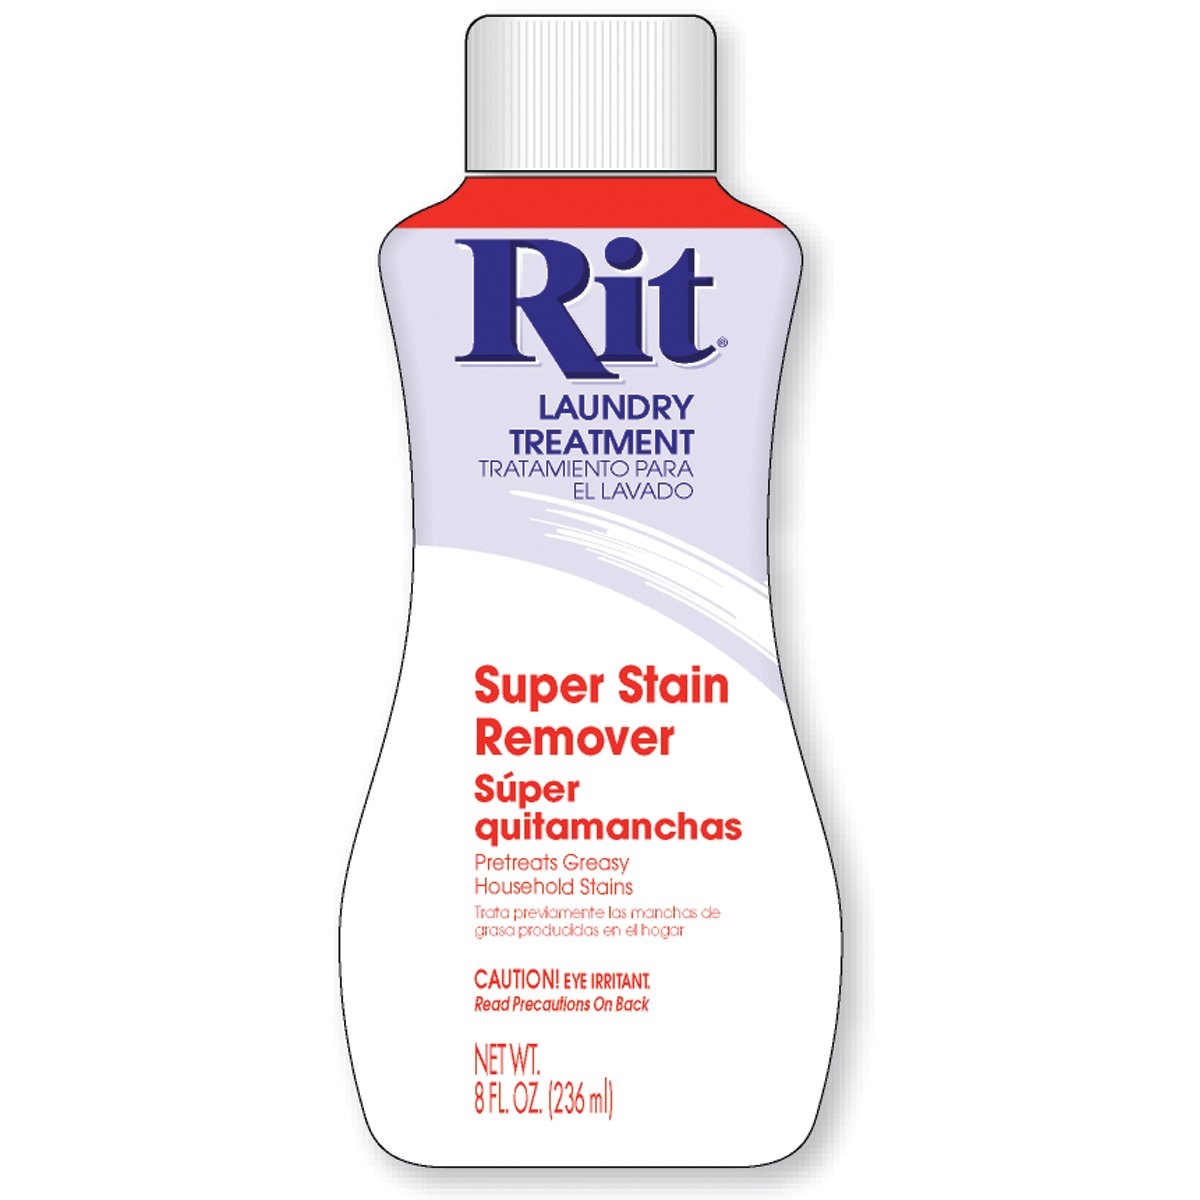 REVIEW – Rit Color Remover